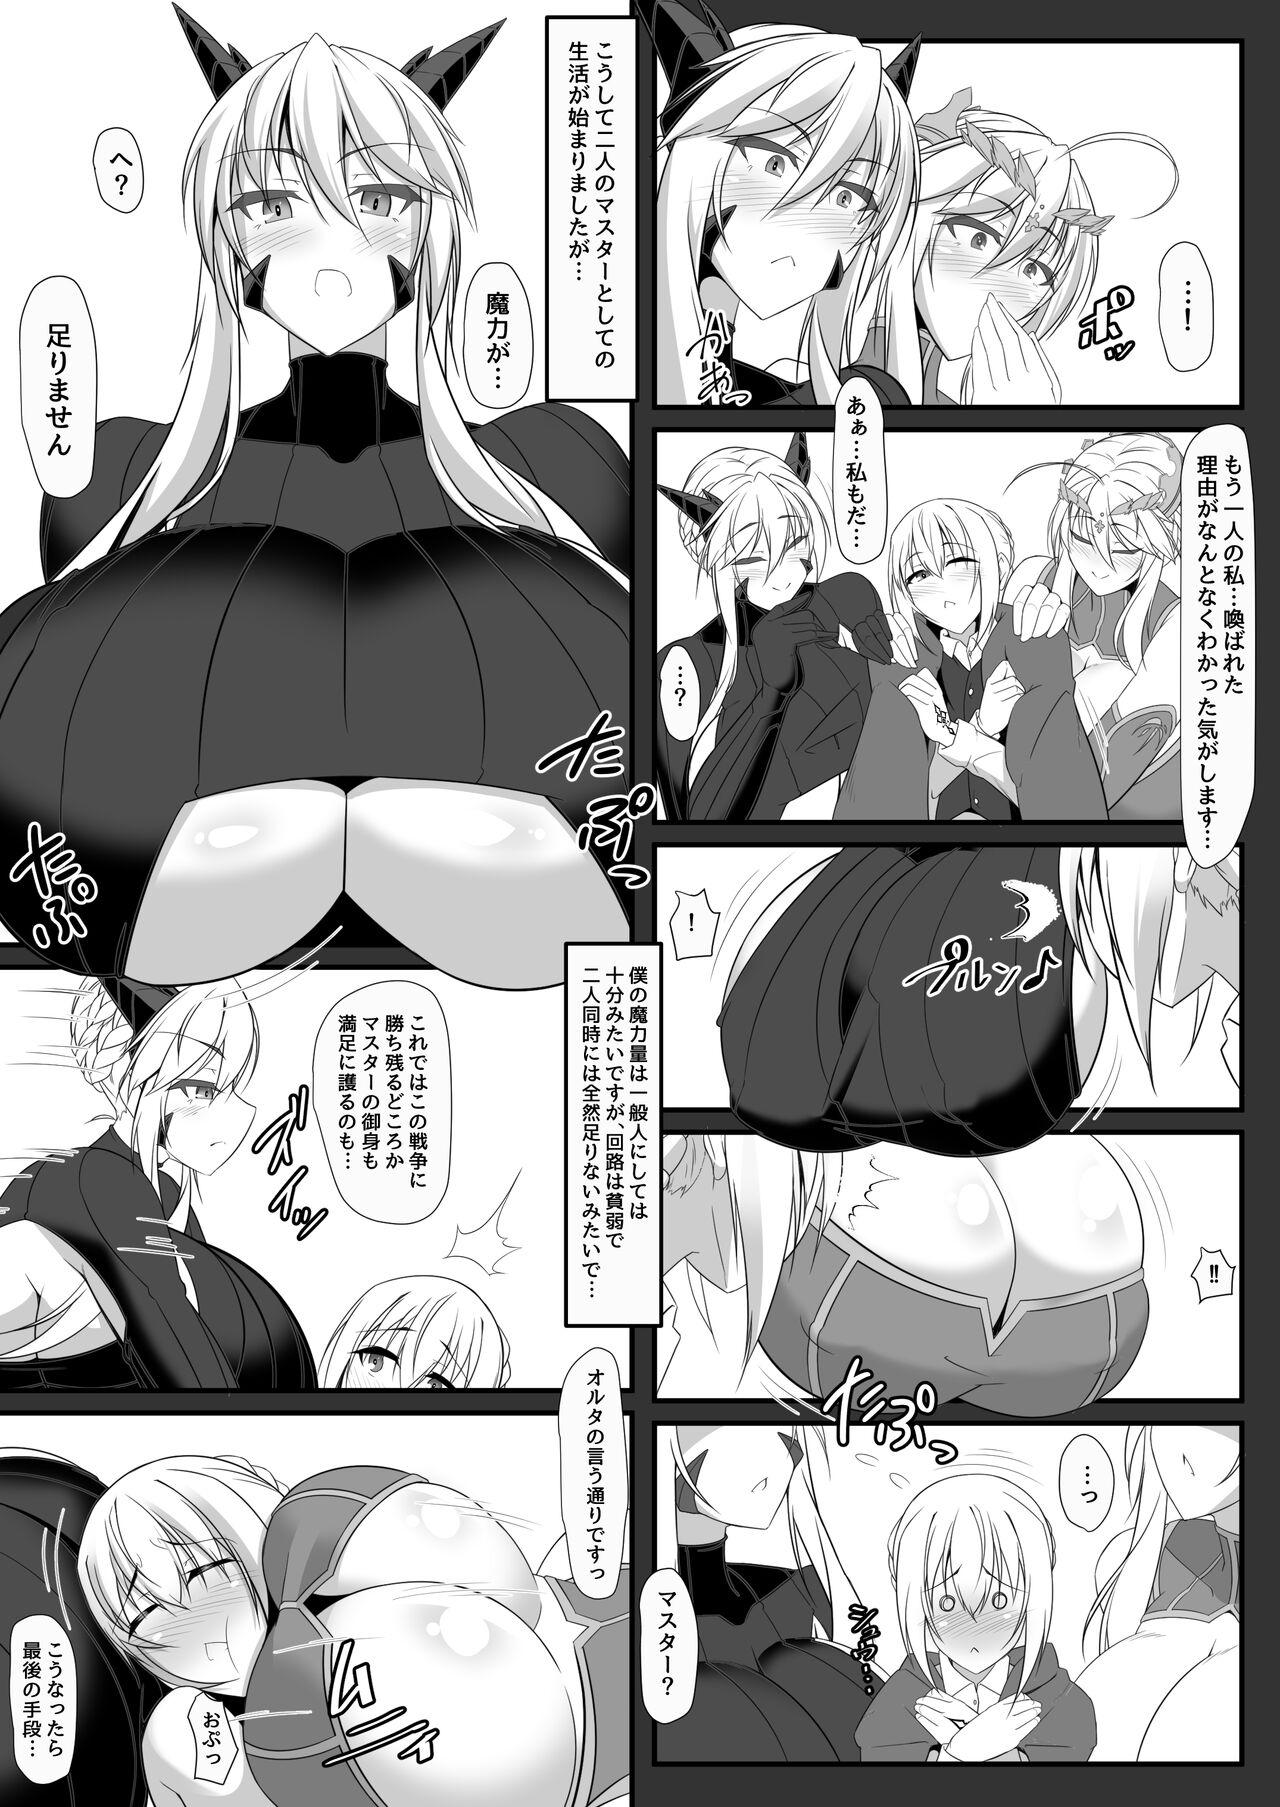 Hardcore Free Porn Souou to Maguau - Fate grand order Cdmx - Page 5